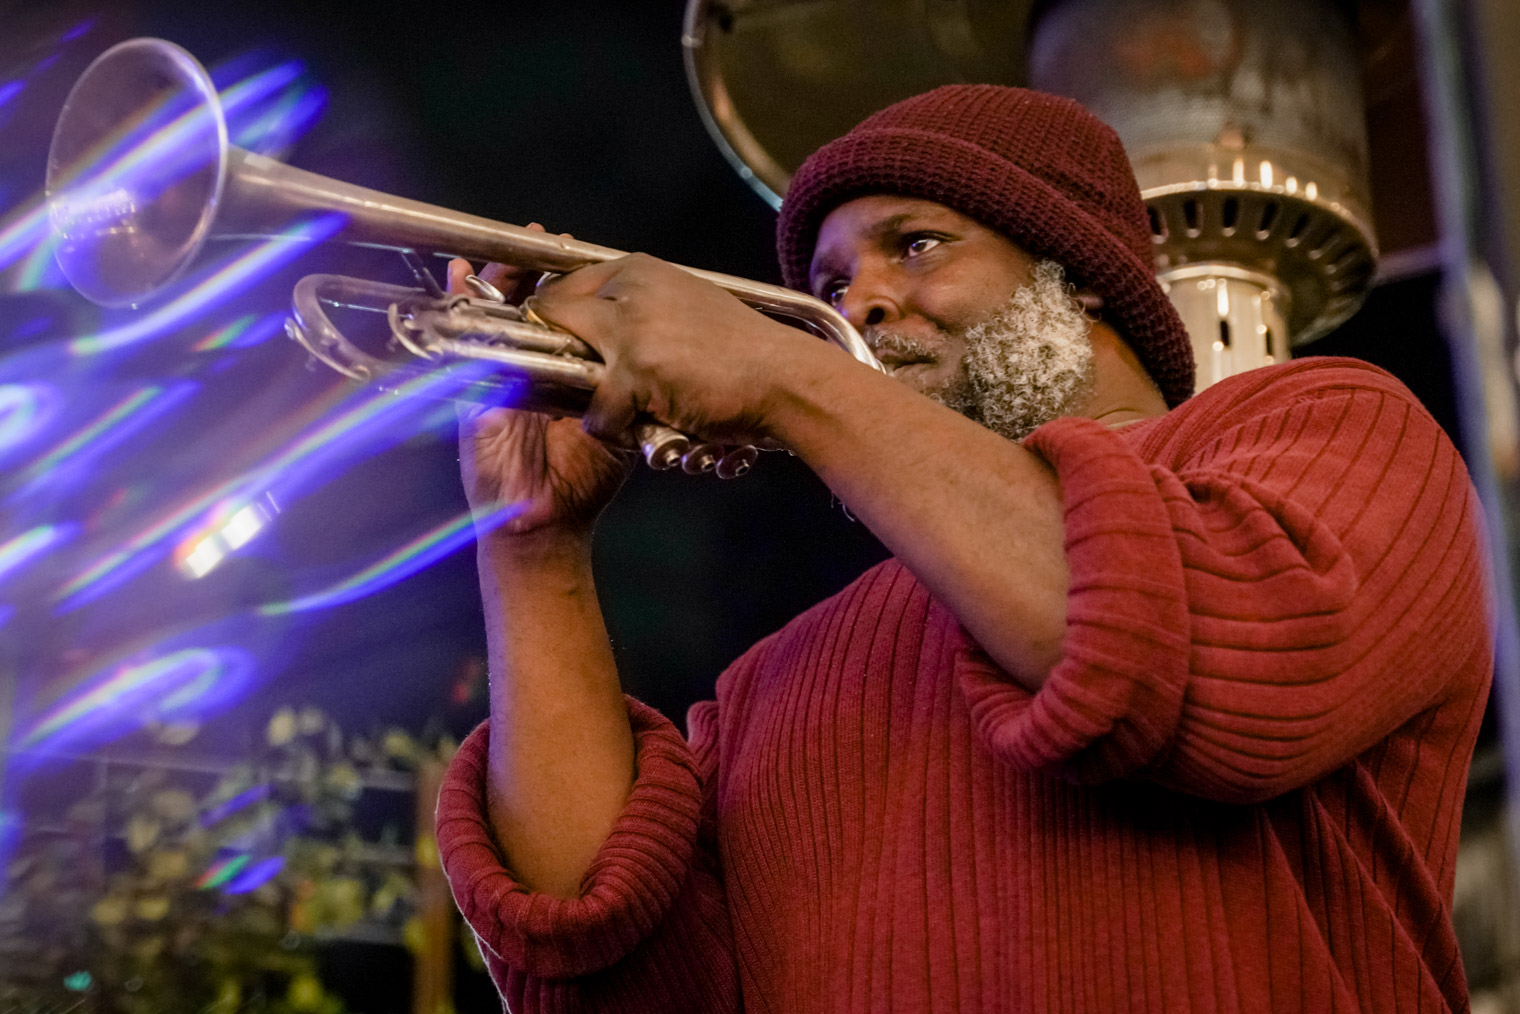 A musician playing trumpet